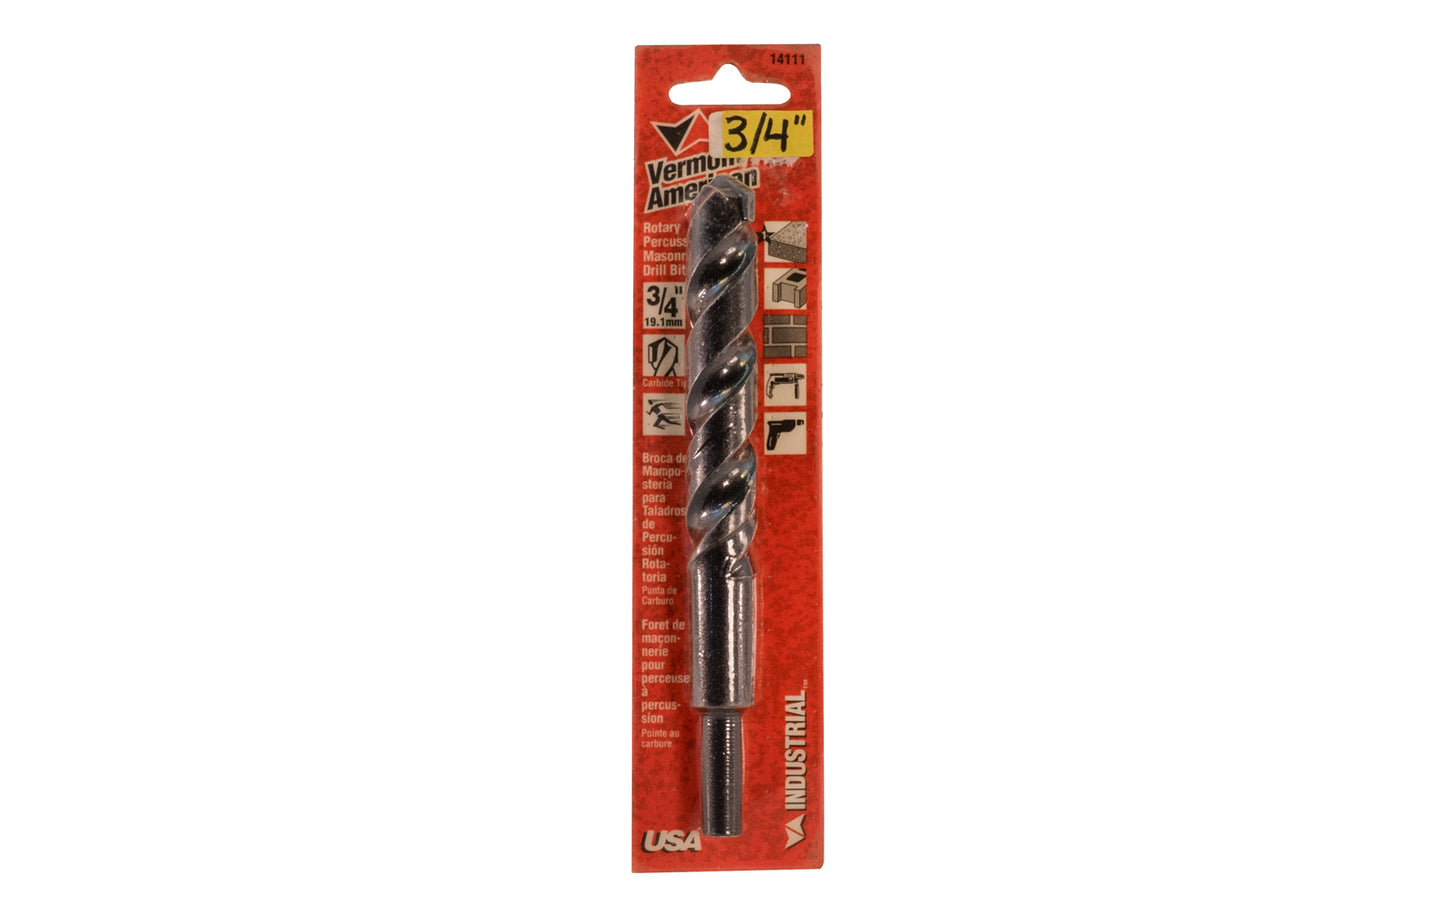 Vermont American 3/4" Masonry Drill Bit. Made in USA. Product 	Mode